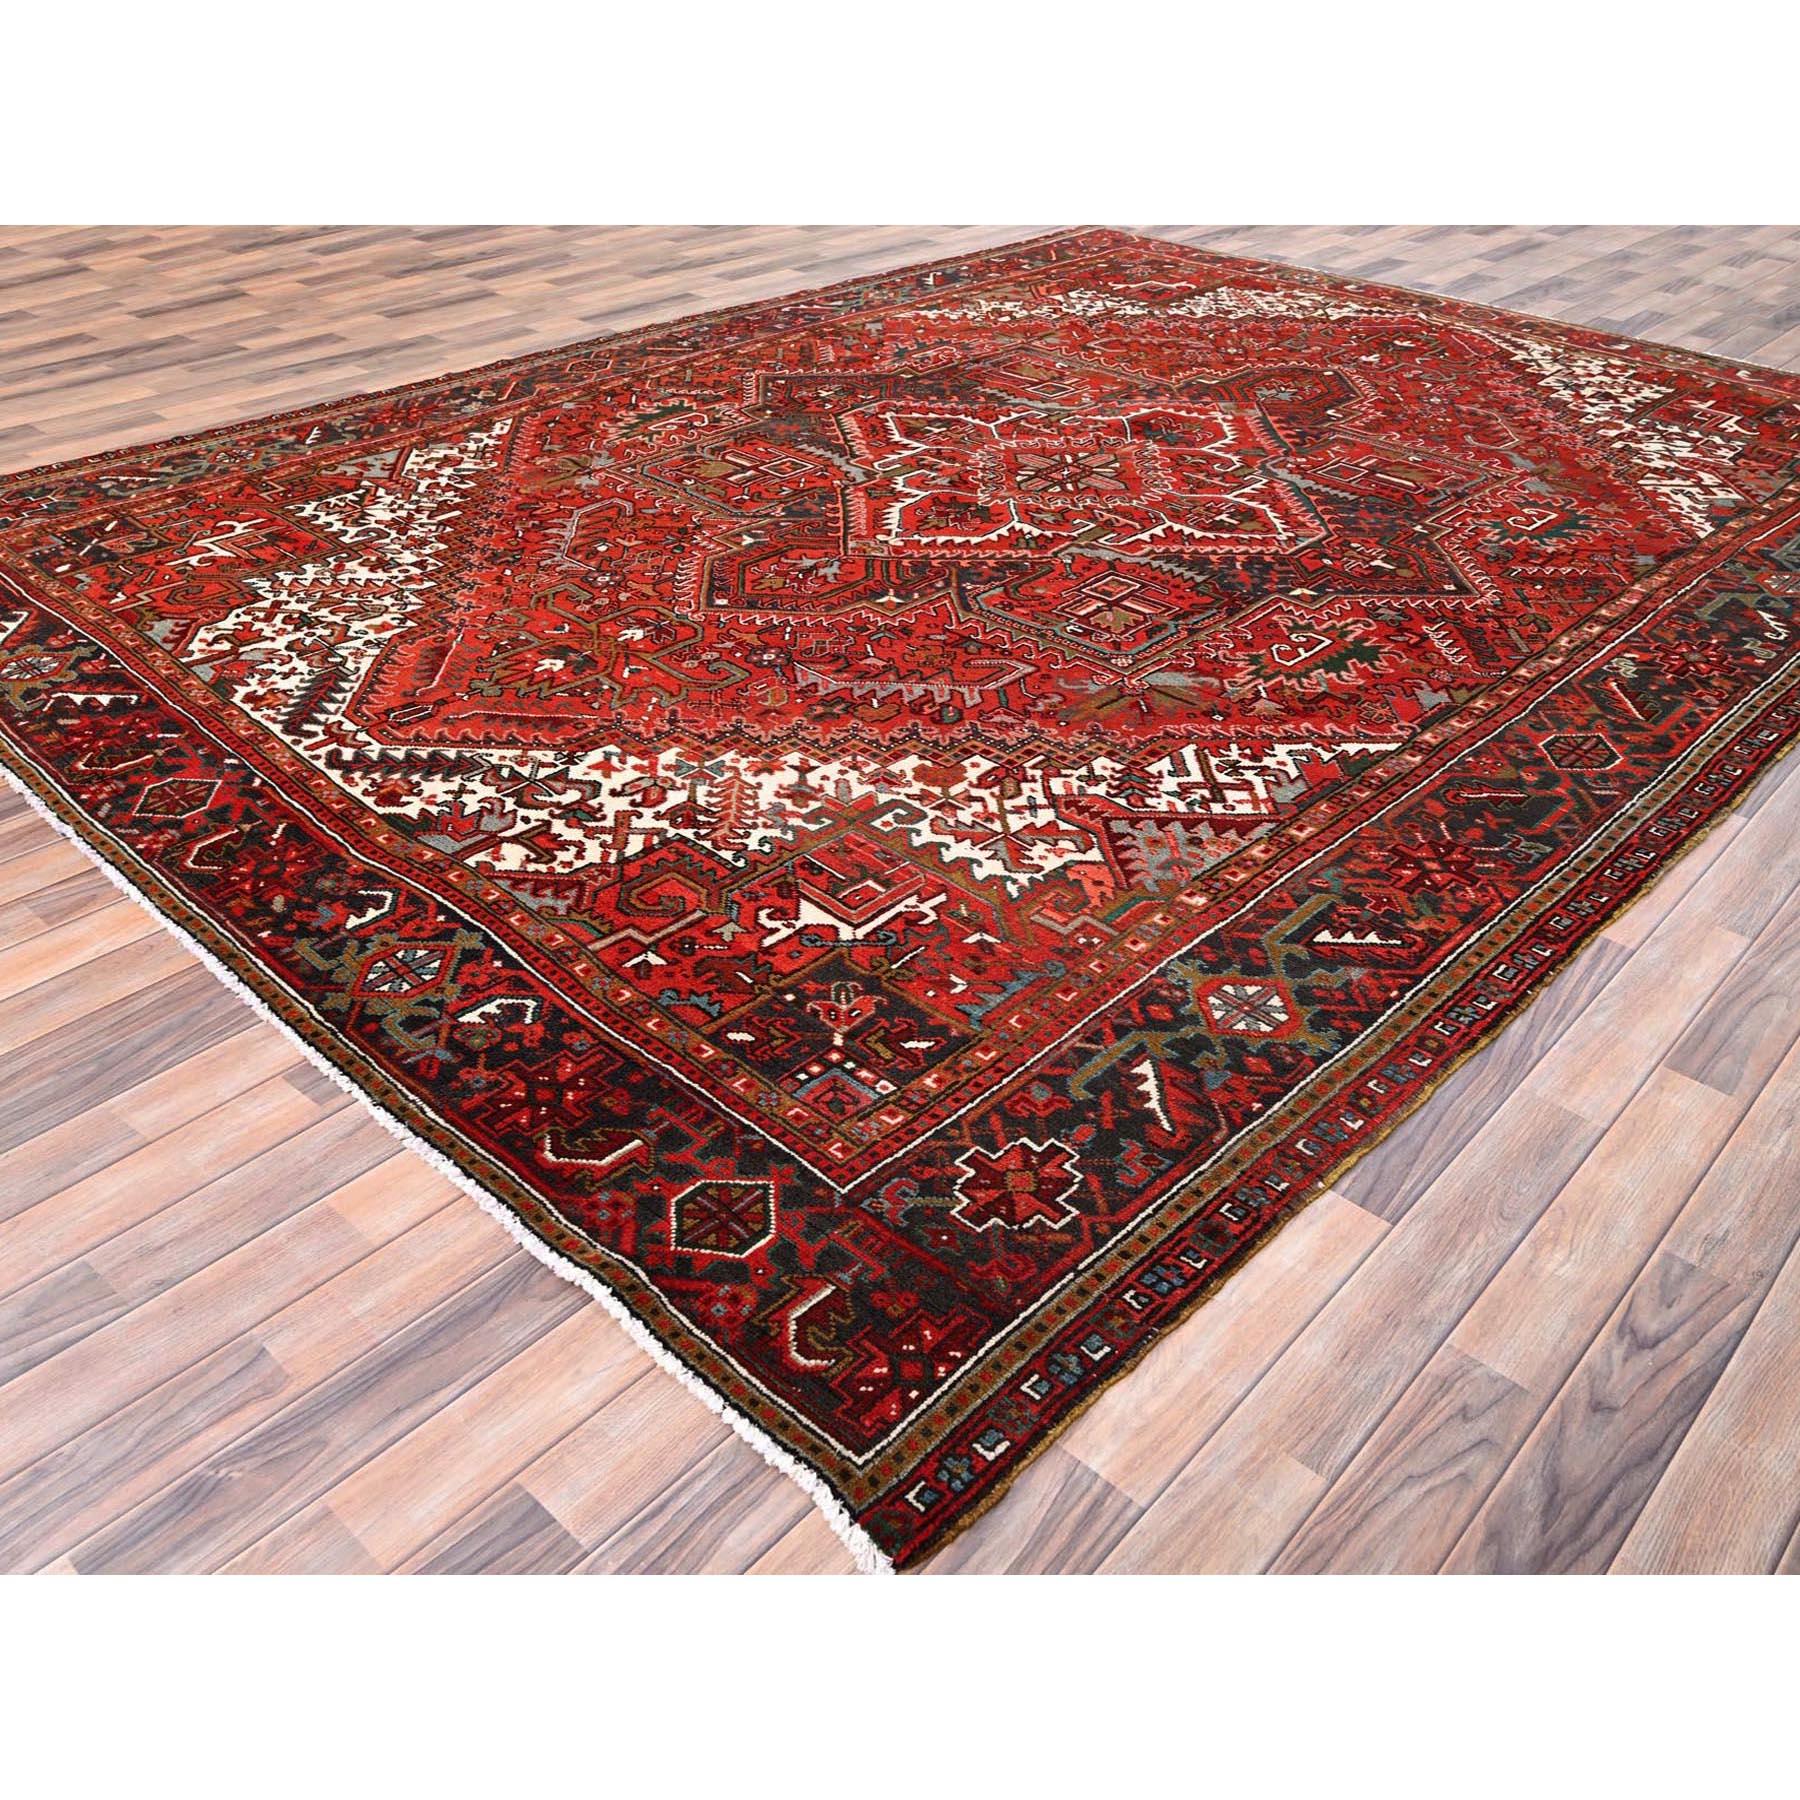 Red Vintage Persian Heriz Good Condition Rustic Feel Worn Wool Hand Knotted Rug In Good Condition For Sale In Carlstadt, NJ